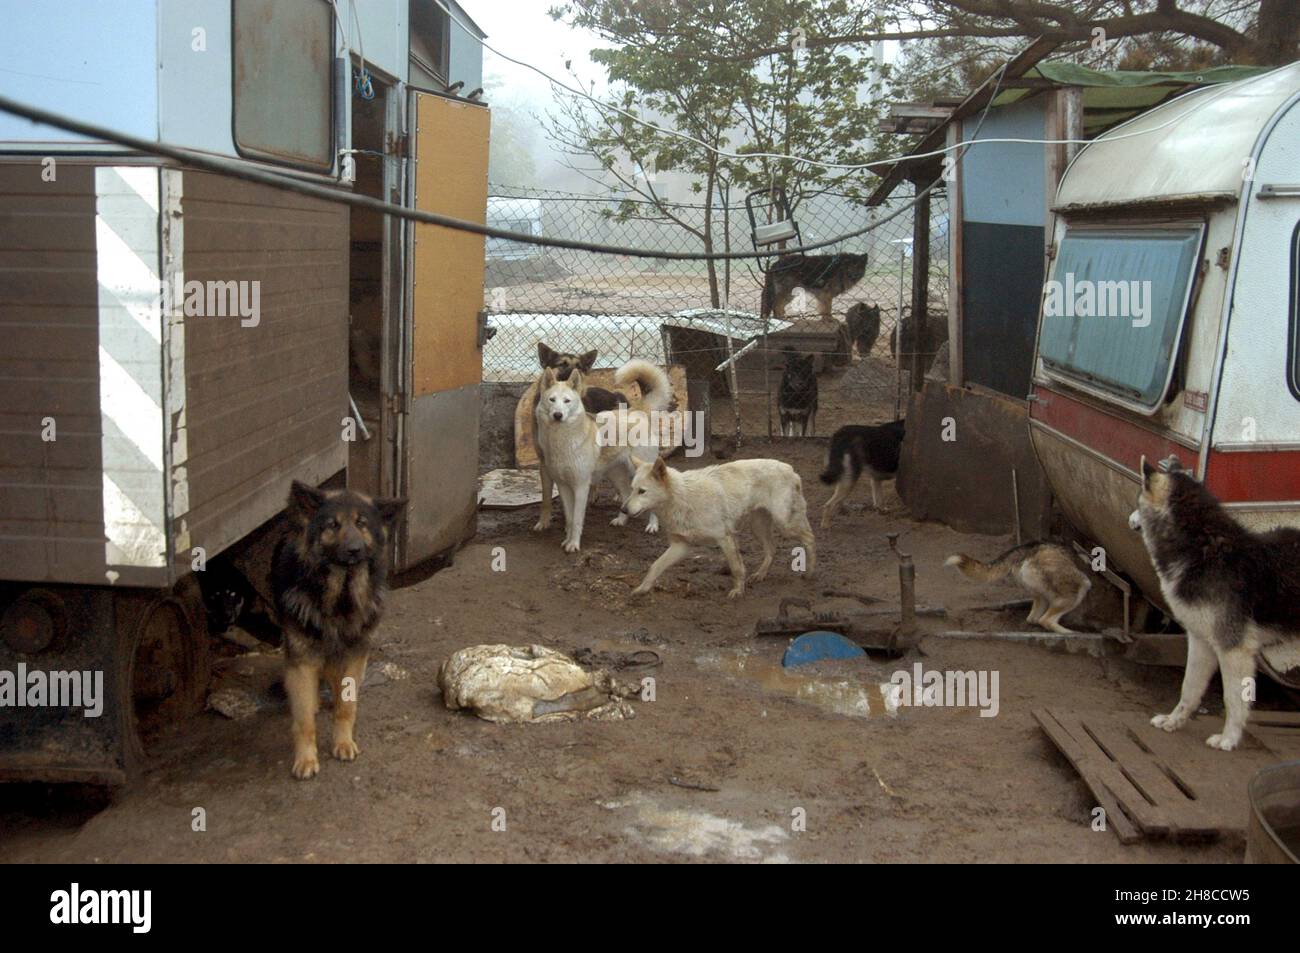 domestic dog (Canis lupus f. familiaris), dogs between run-down caravans, animal hoarding, Germany Stock Photo